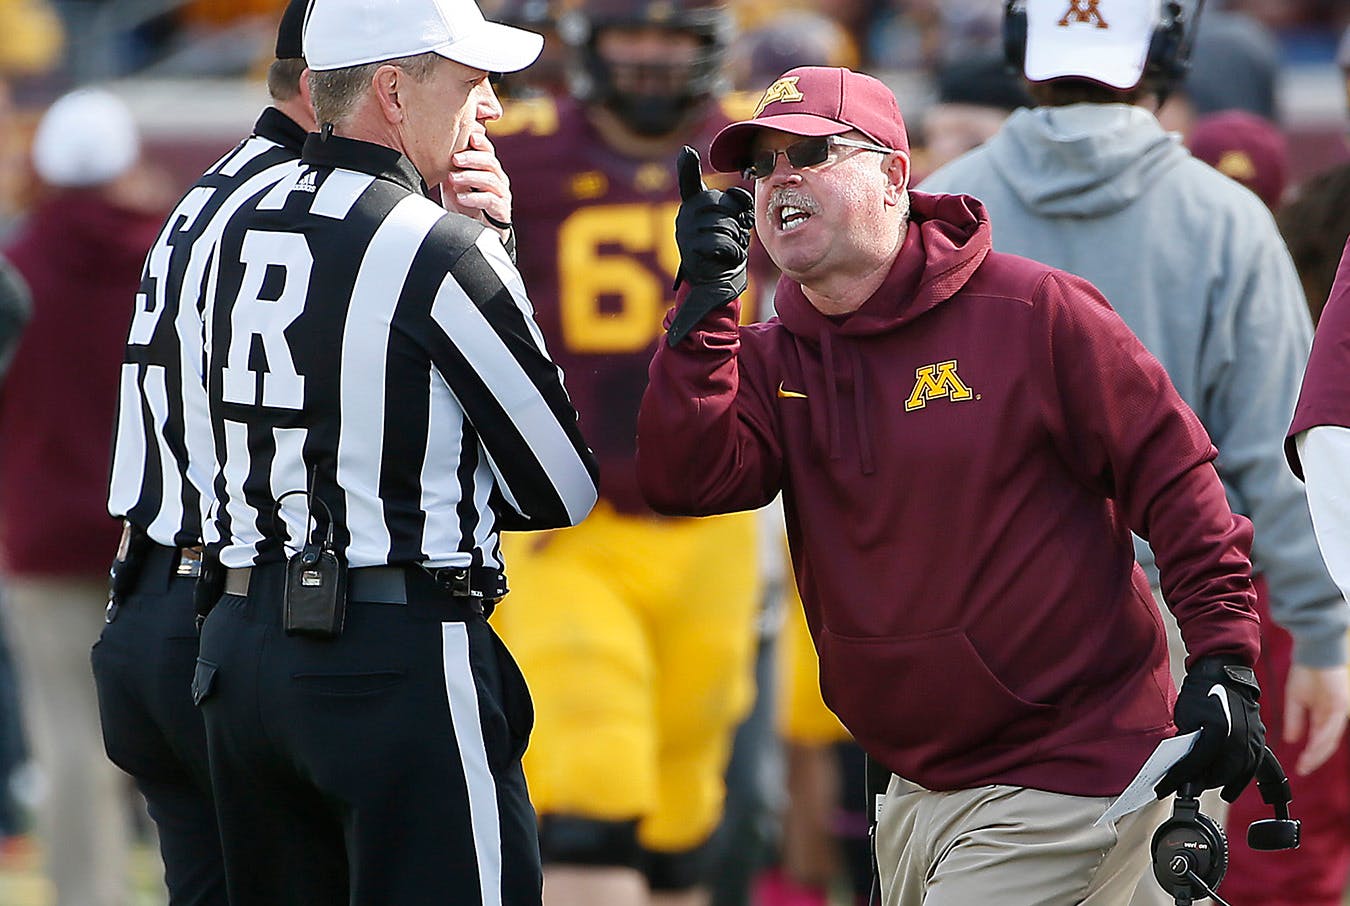 After a tough loss to Illinois, the Gophers are moving on.